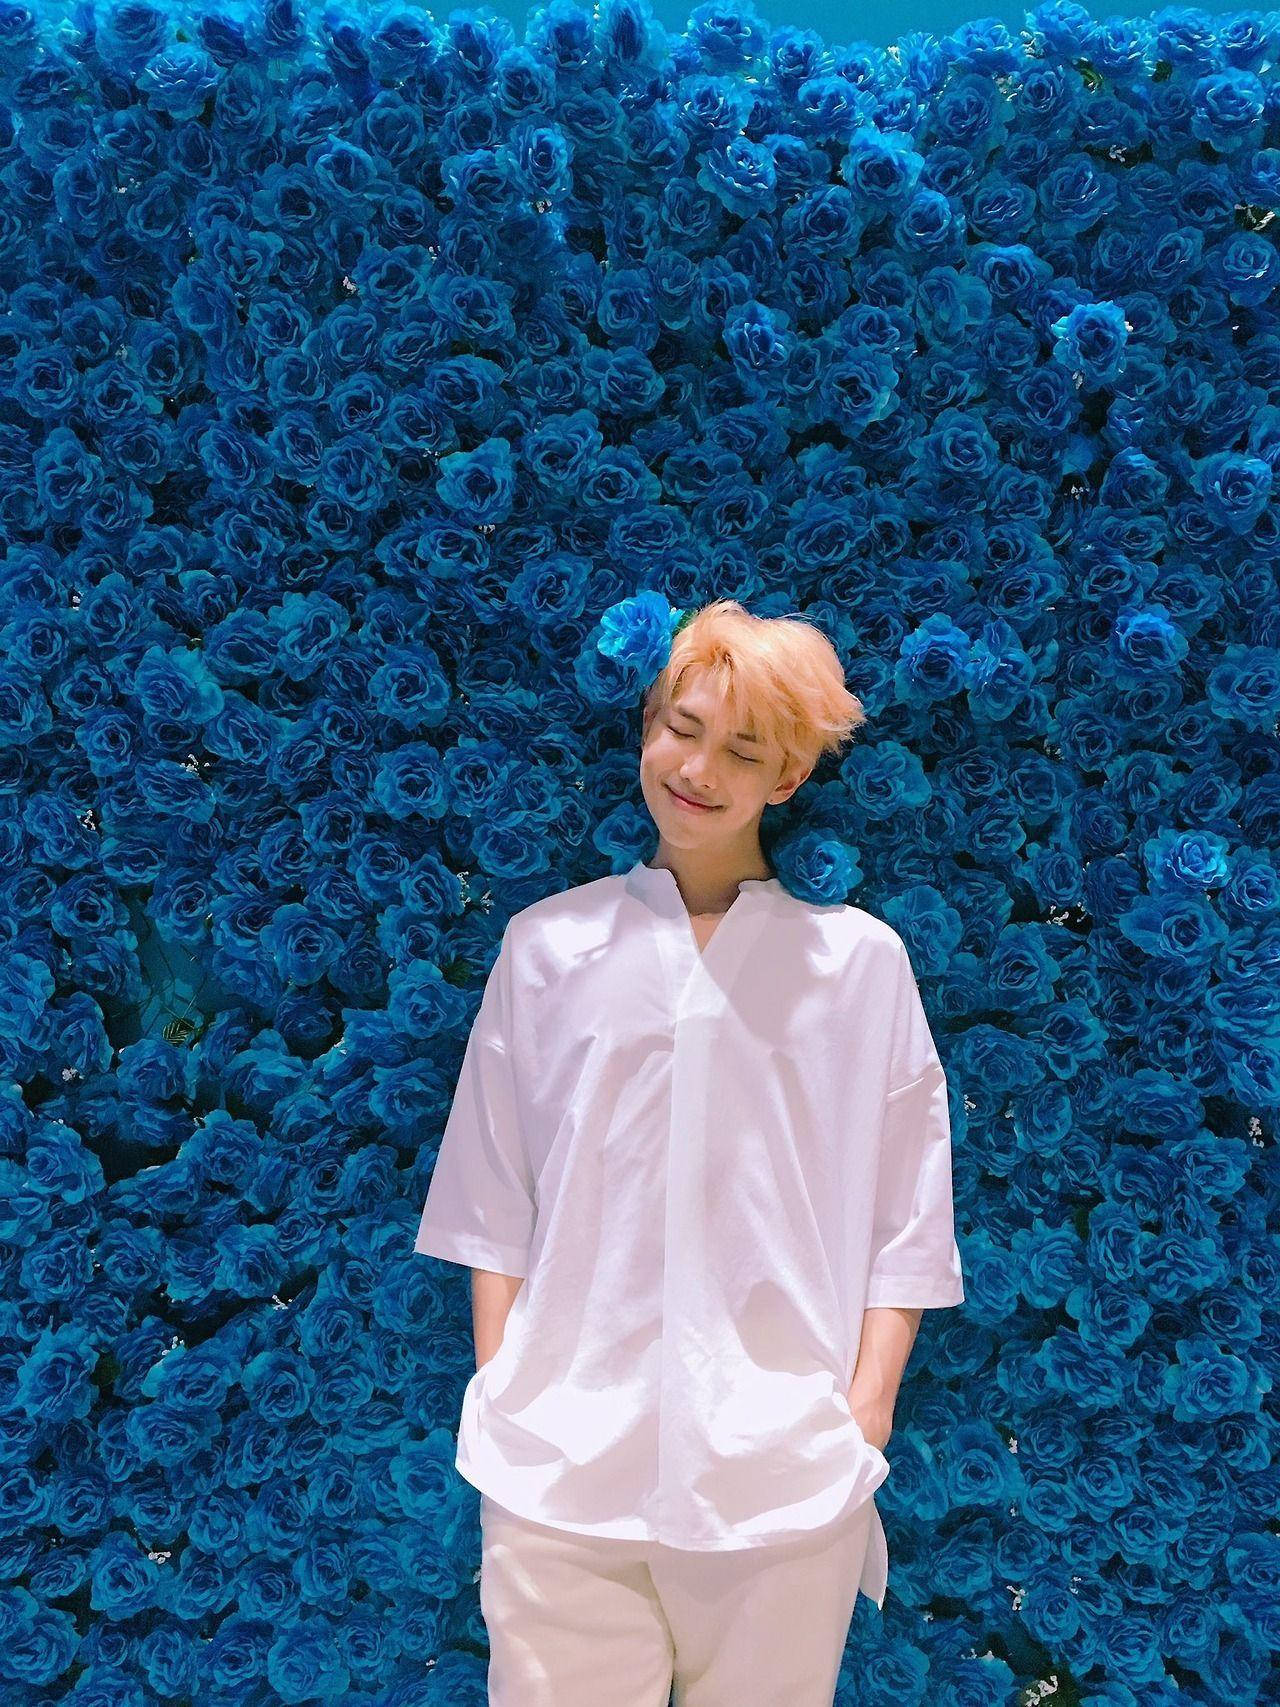 Namjoon Poses With Blue Roses Wallpaper